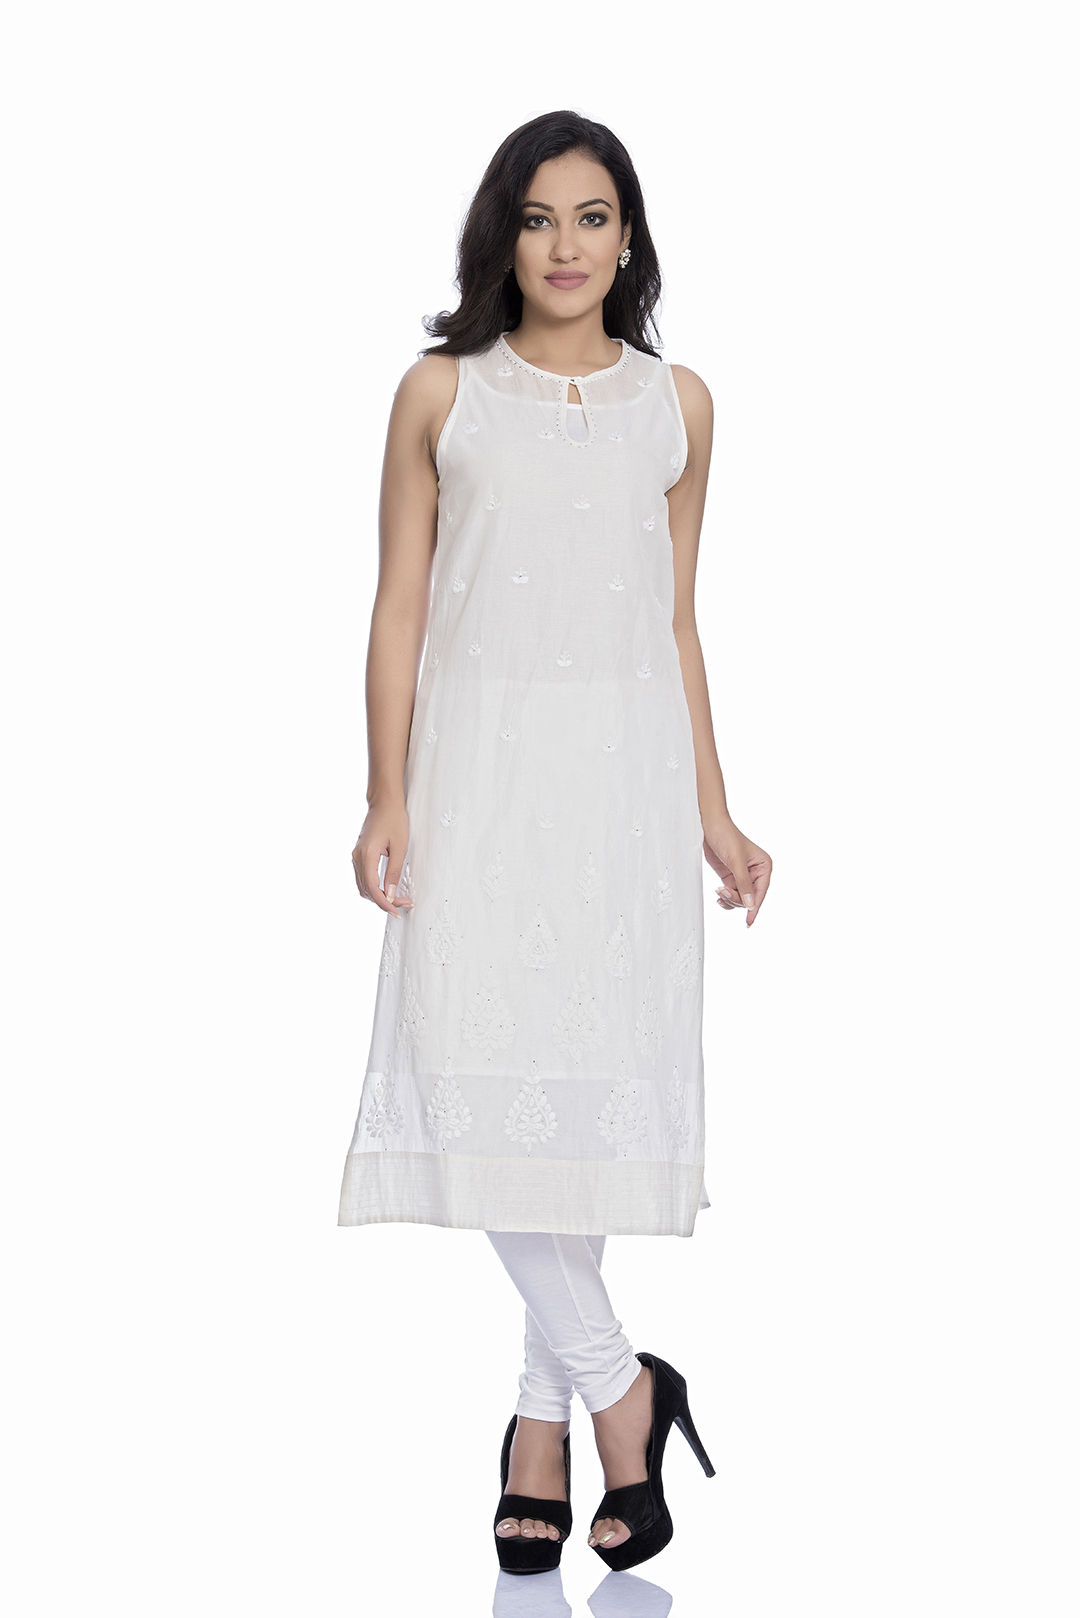 Buy Ada Hand Embroidery Lucknowi Chikankari Pure Cotton Short Kurti Top for  Women A411139 White (S) at Amazon.in